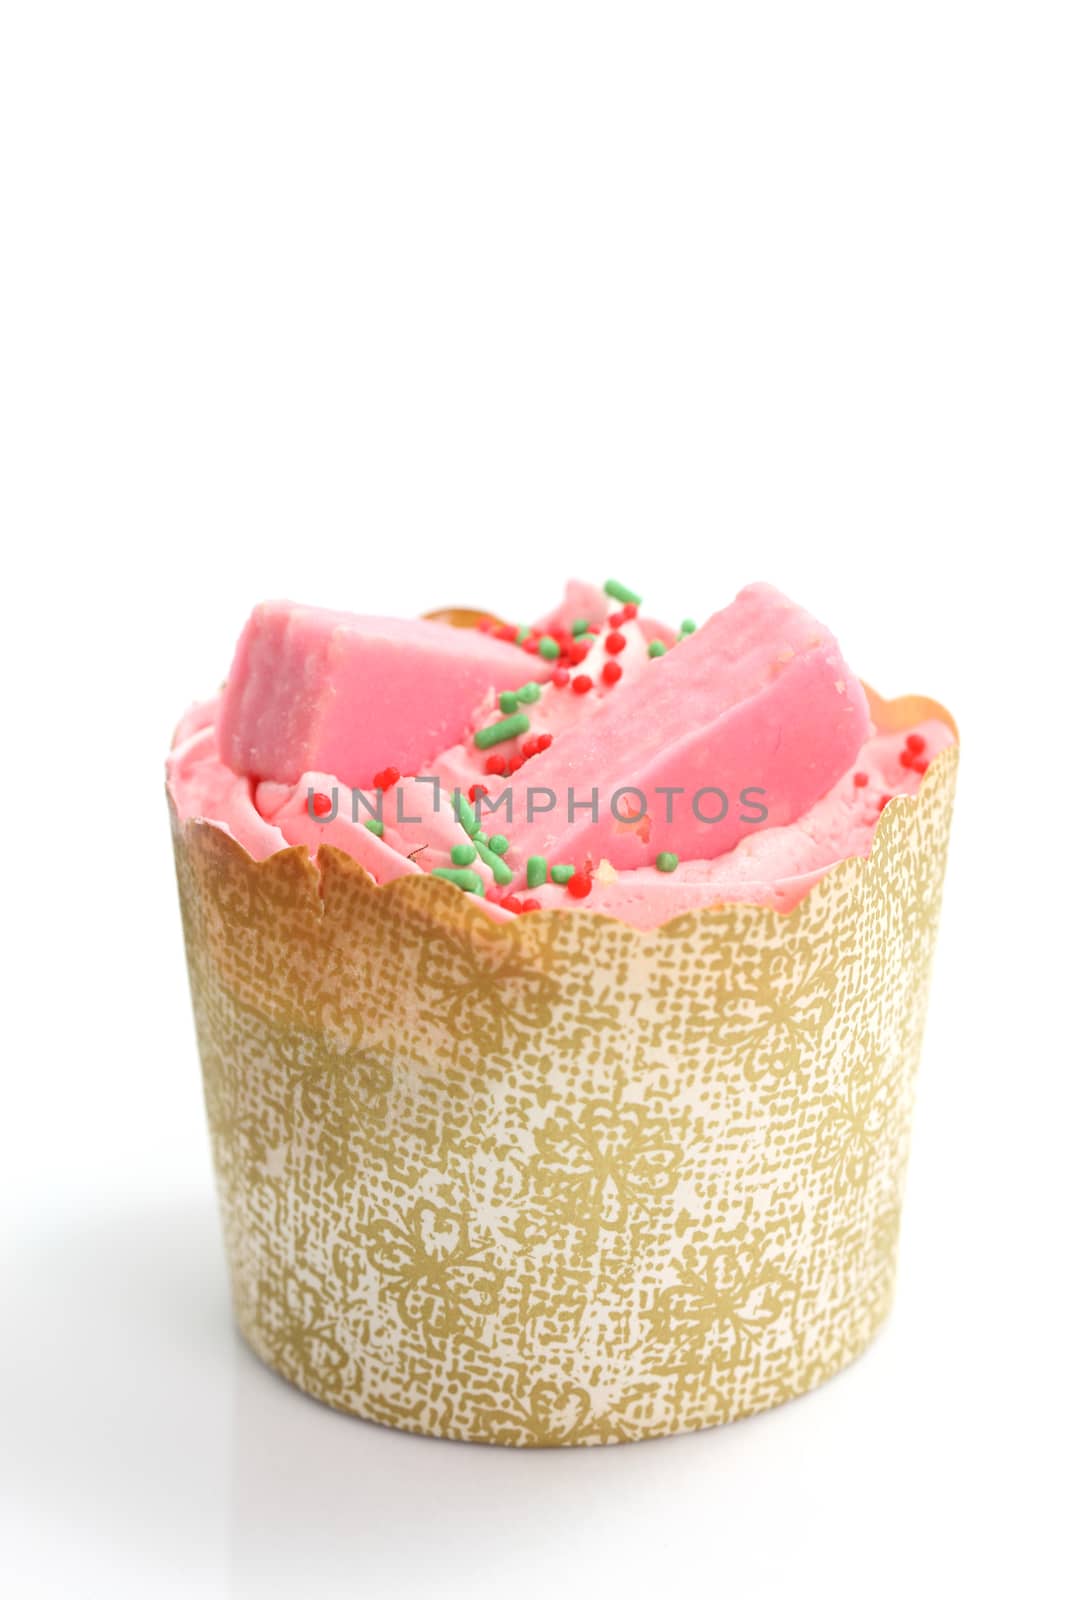 cupcake isolated in white background